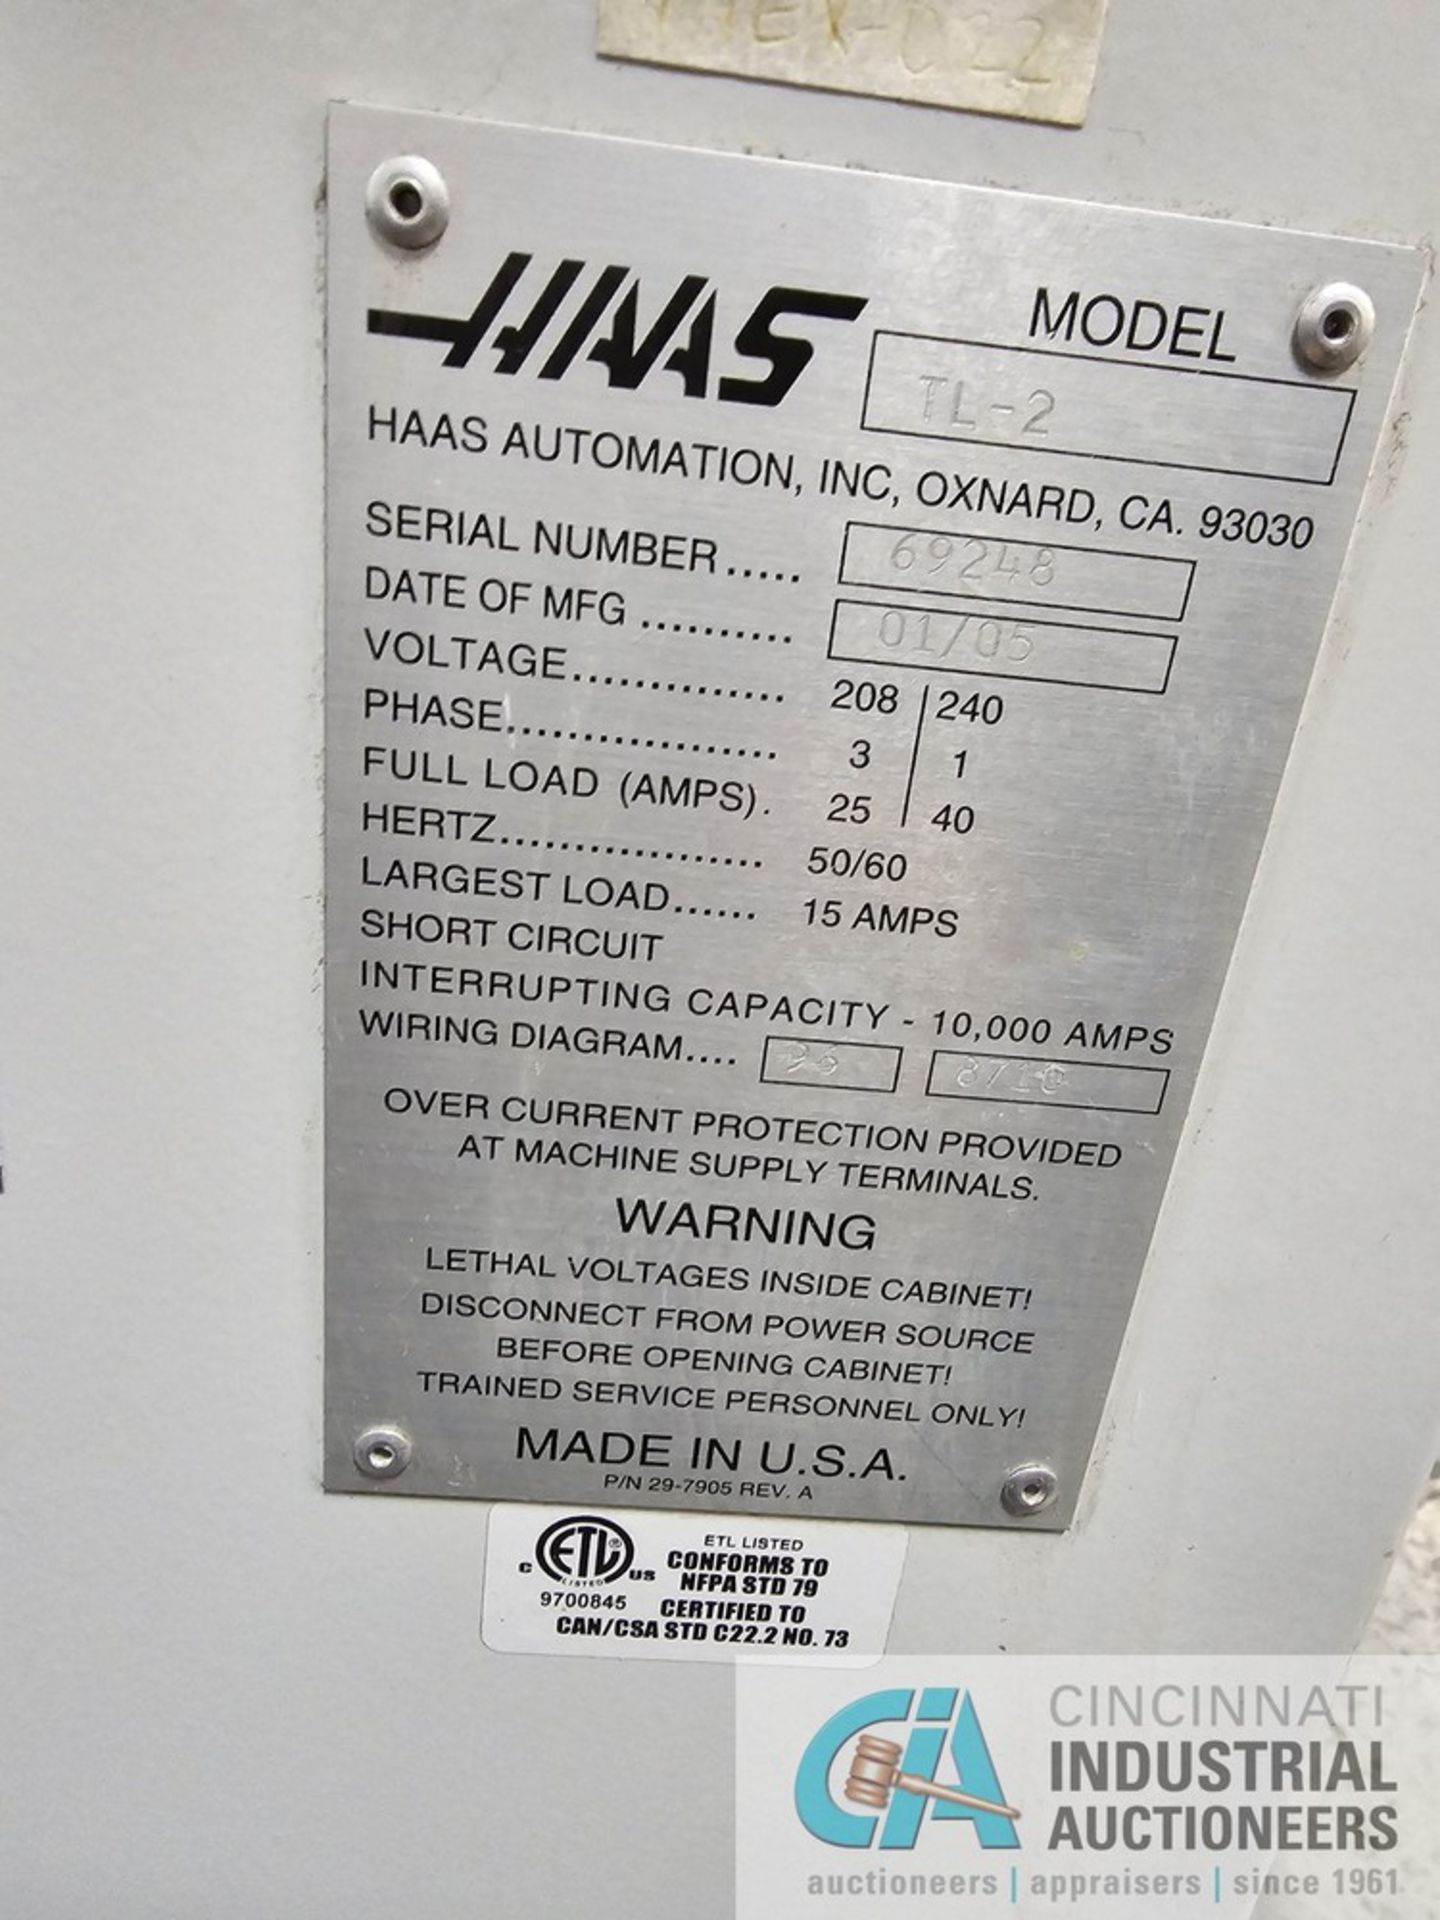 28" X 48" HAAS MODEL TL-2 CNC LATHE; S/N 69248, 2-3/4" SPINDLE HOLE, TAILSTOCK, 10" 3-JAW CHUCK - Image 7 of 10